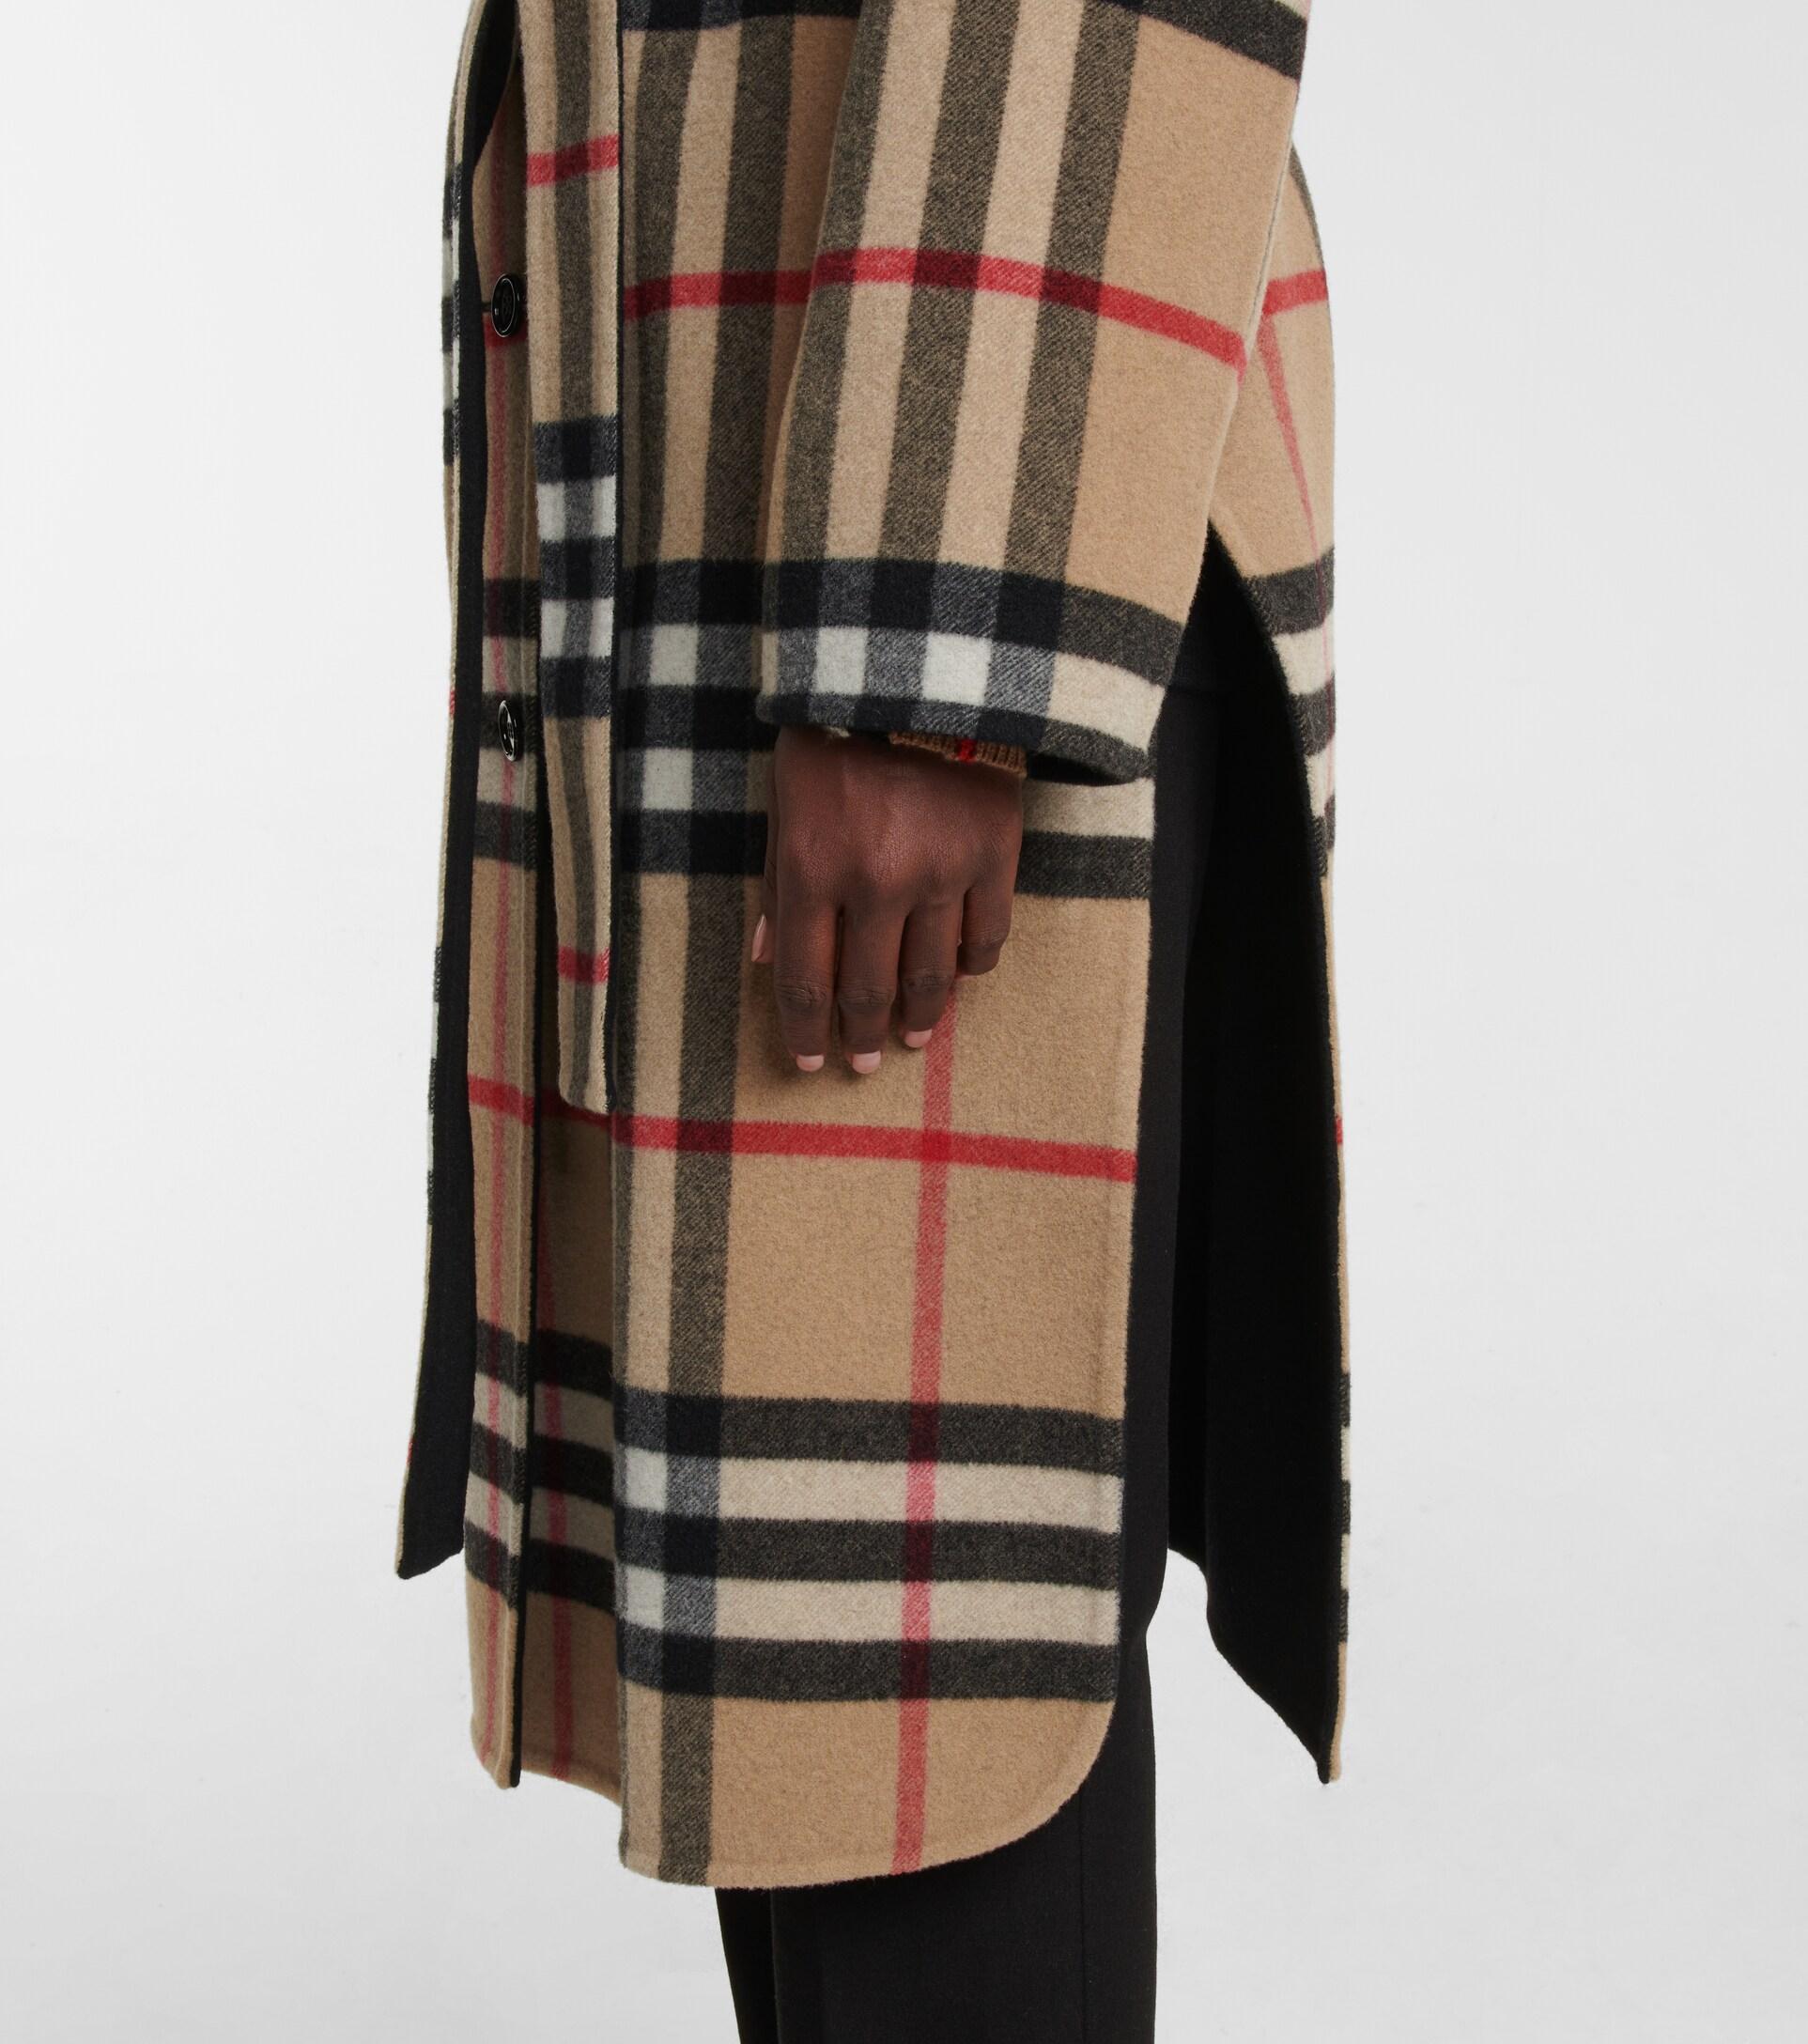 Burberry Vintage Check Reversible Wool Coat in Natural | Lyst